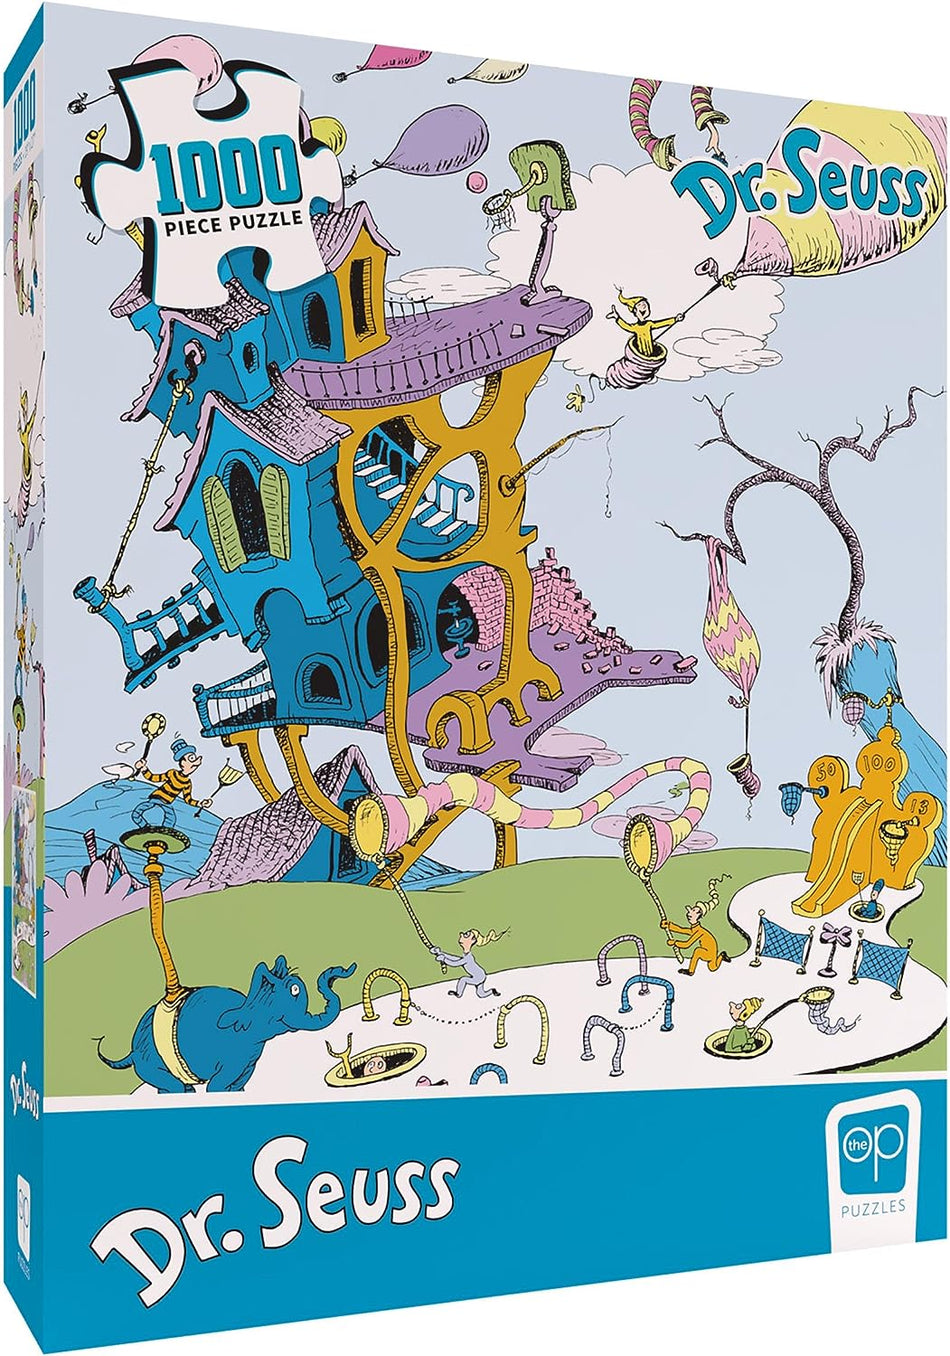 USAOPOLY: Dr. Seuss “Oh, The Places You'll Go”: 1000 Piece Puzzle